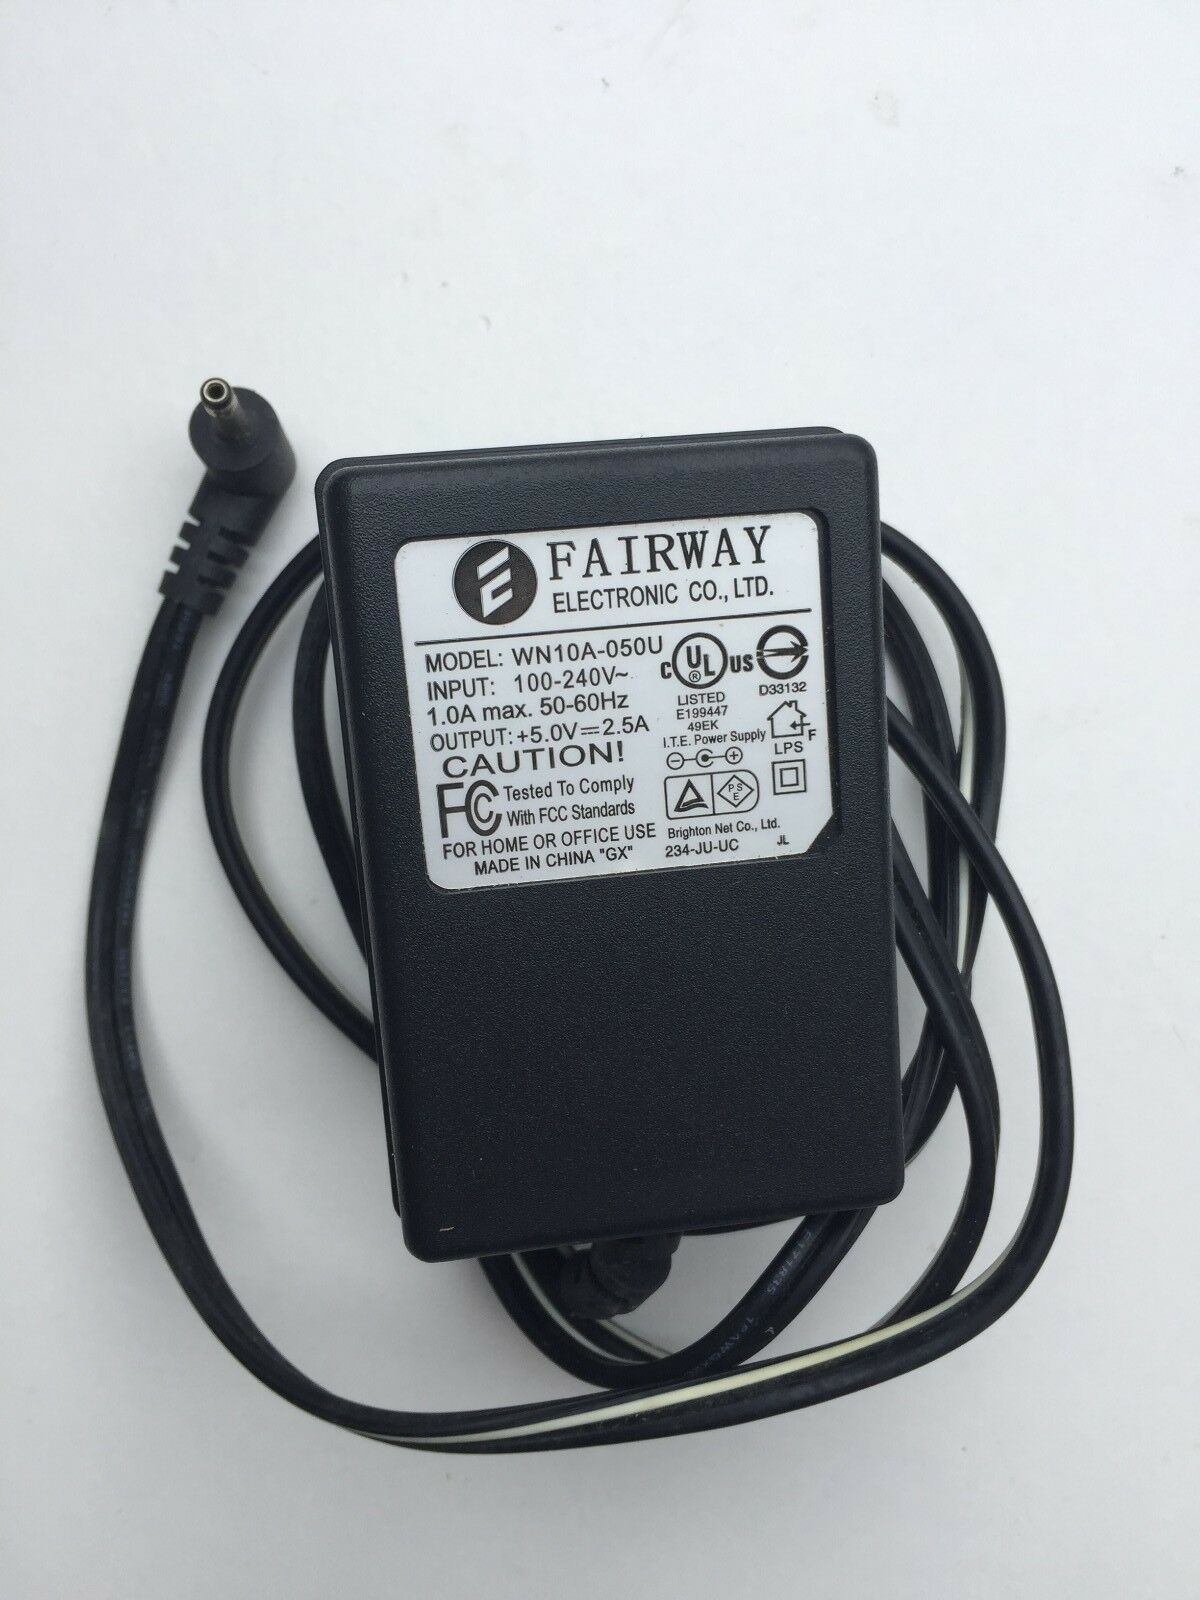 Fairway Electronic Co. WN10A-050U 5V 2.5A Power Supply AC Adapter Charger Cord Model: WN10A-050U Brand: FairWay Colo - Click Image to Close